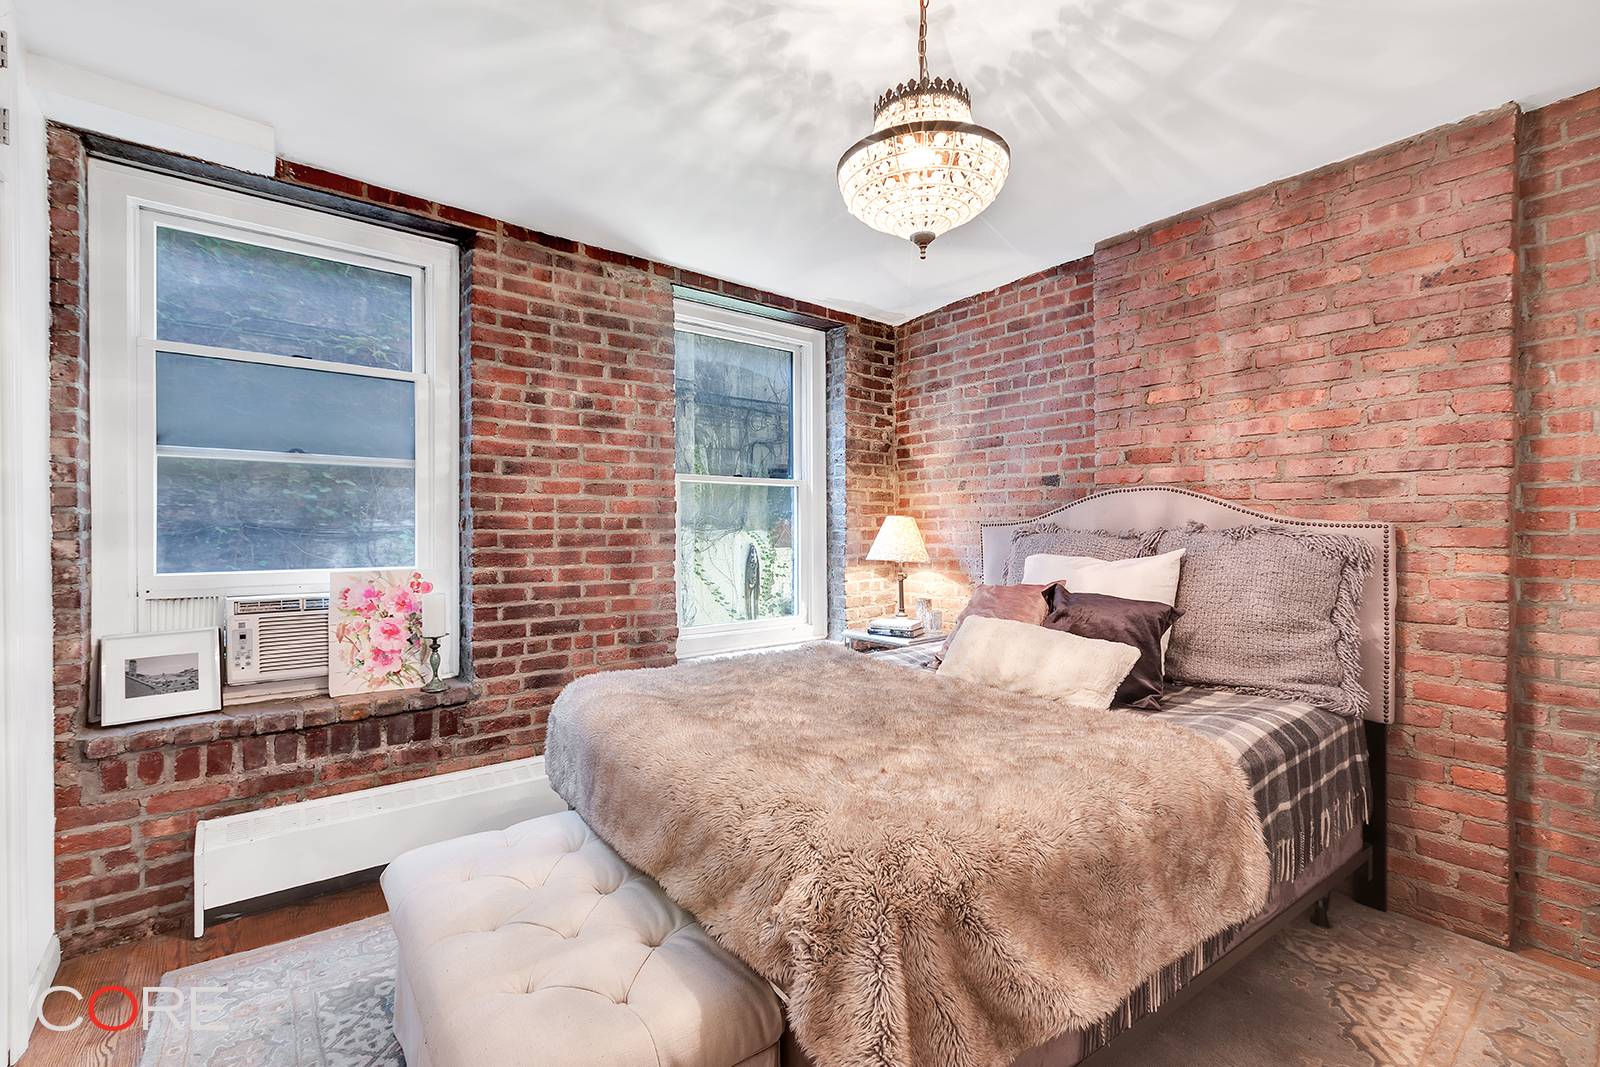 RECENTLY REMODELED ! A charming one bedroom cooperative nestled in the heart of Greenwich Village.